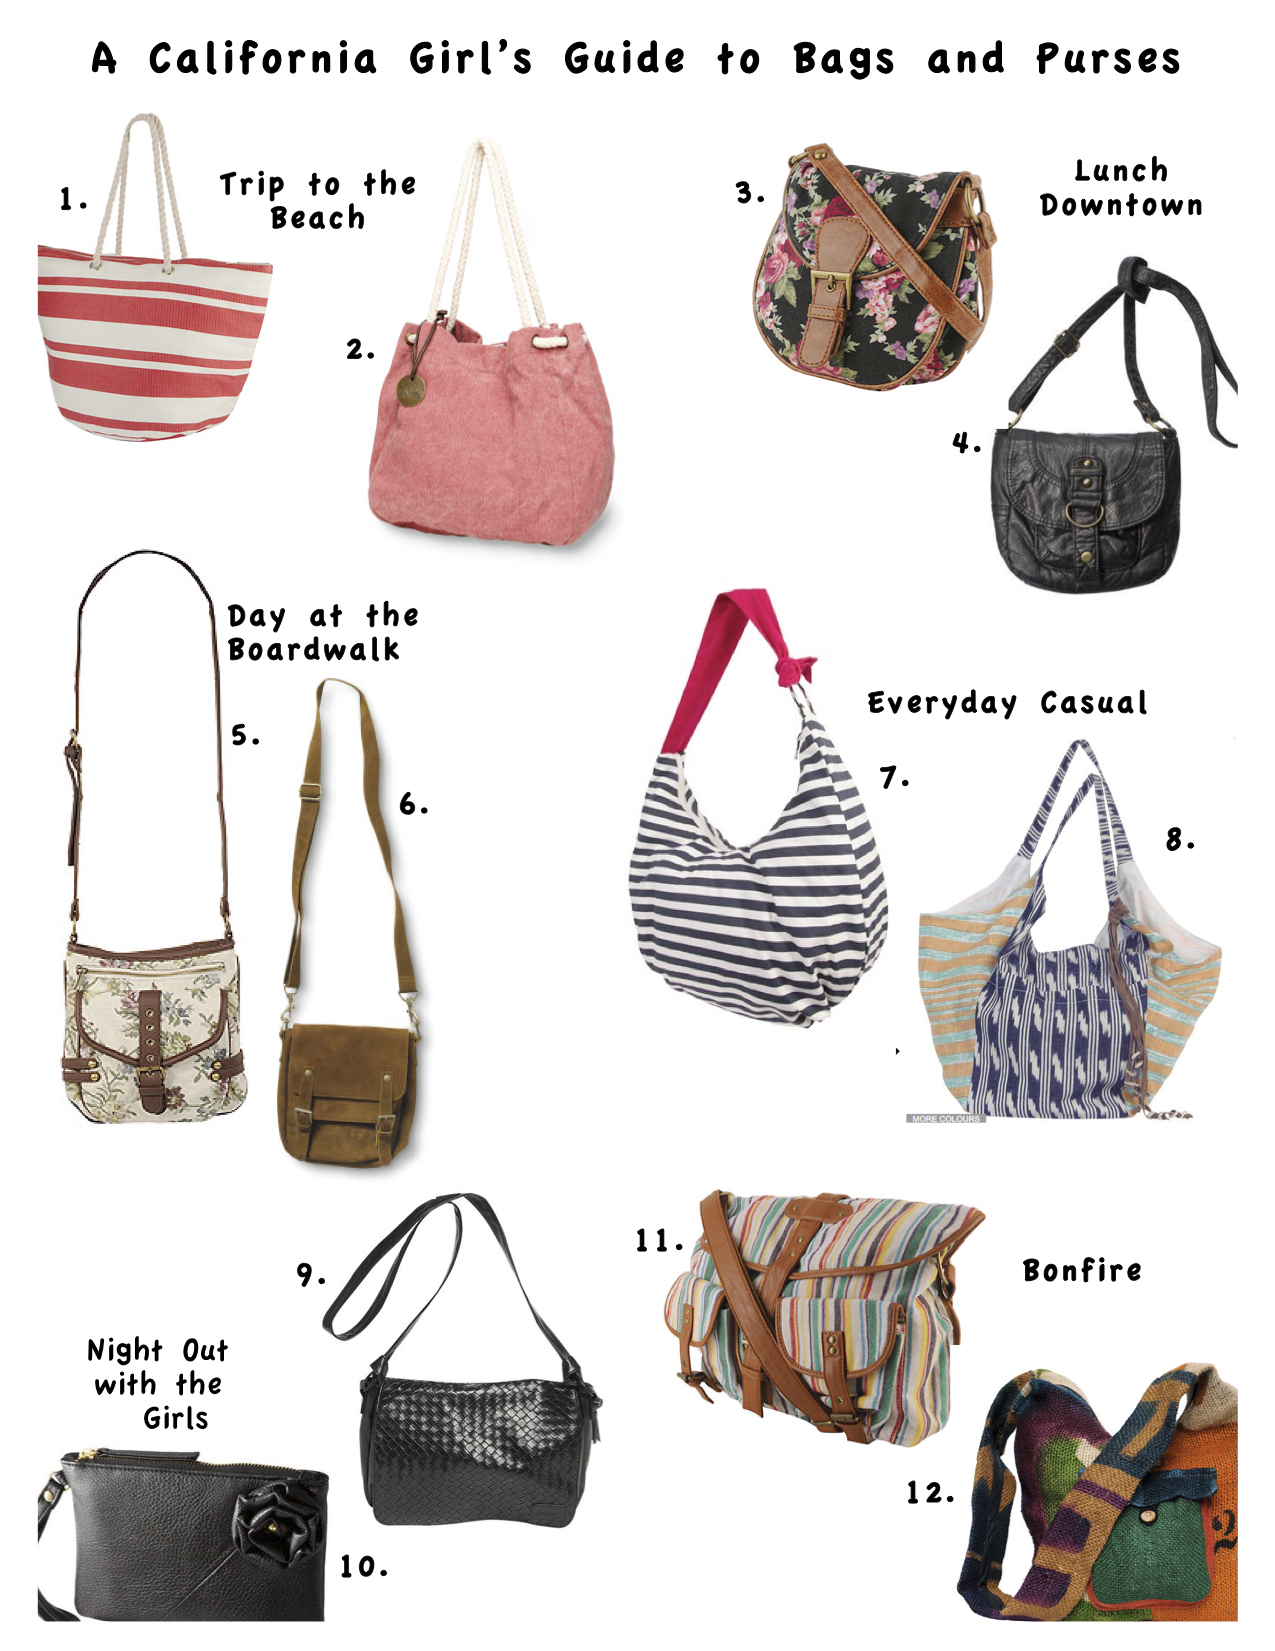 A California Girl’s Guide to Bags and Purses – The Hannah Conrad